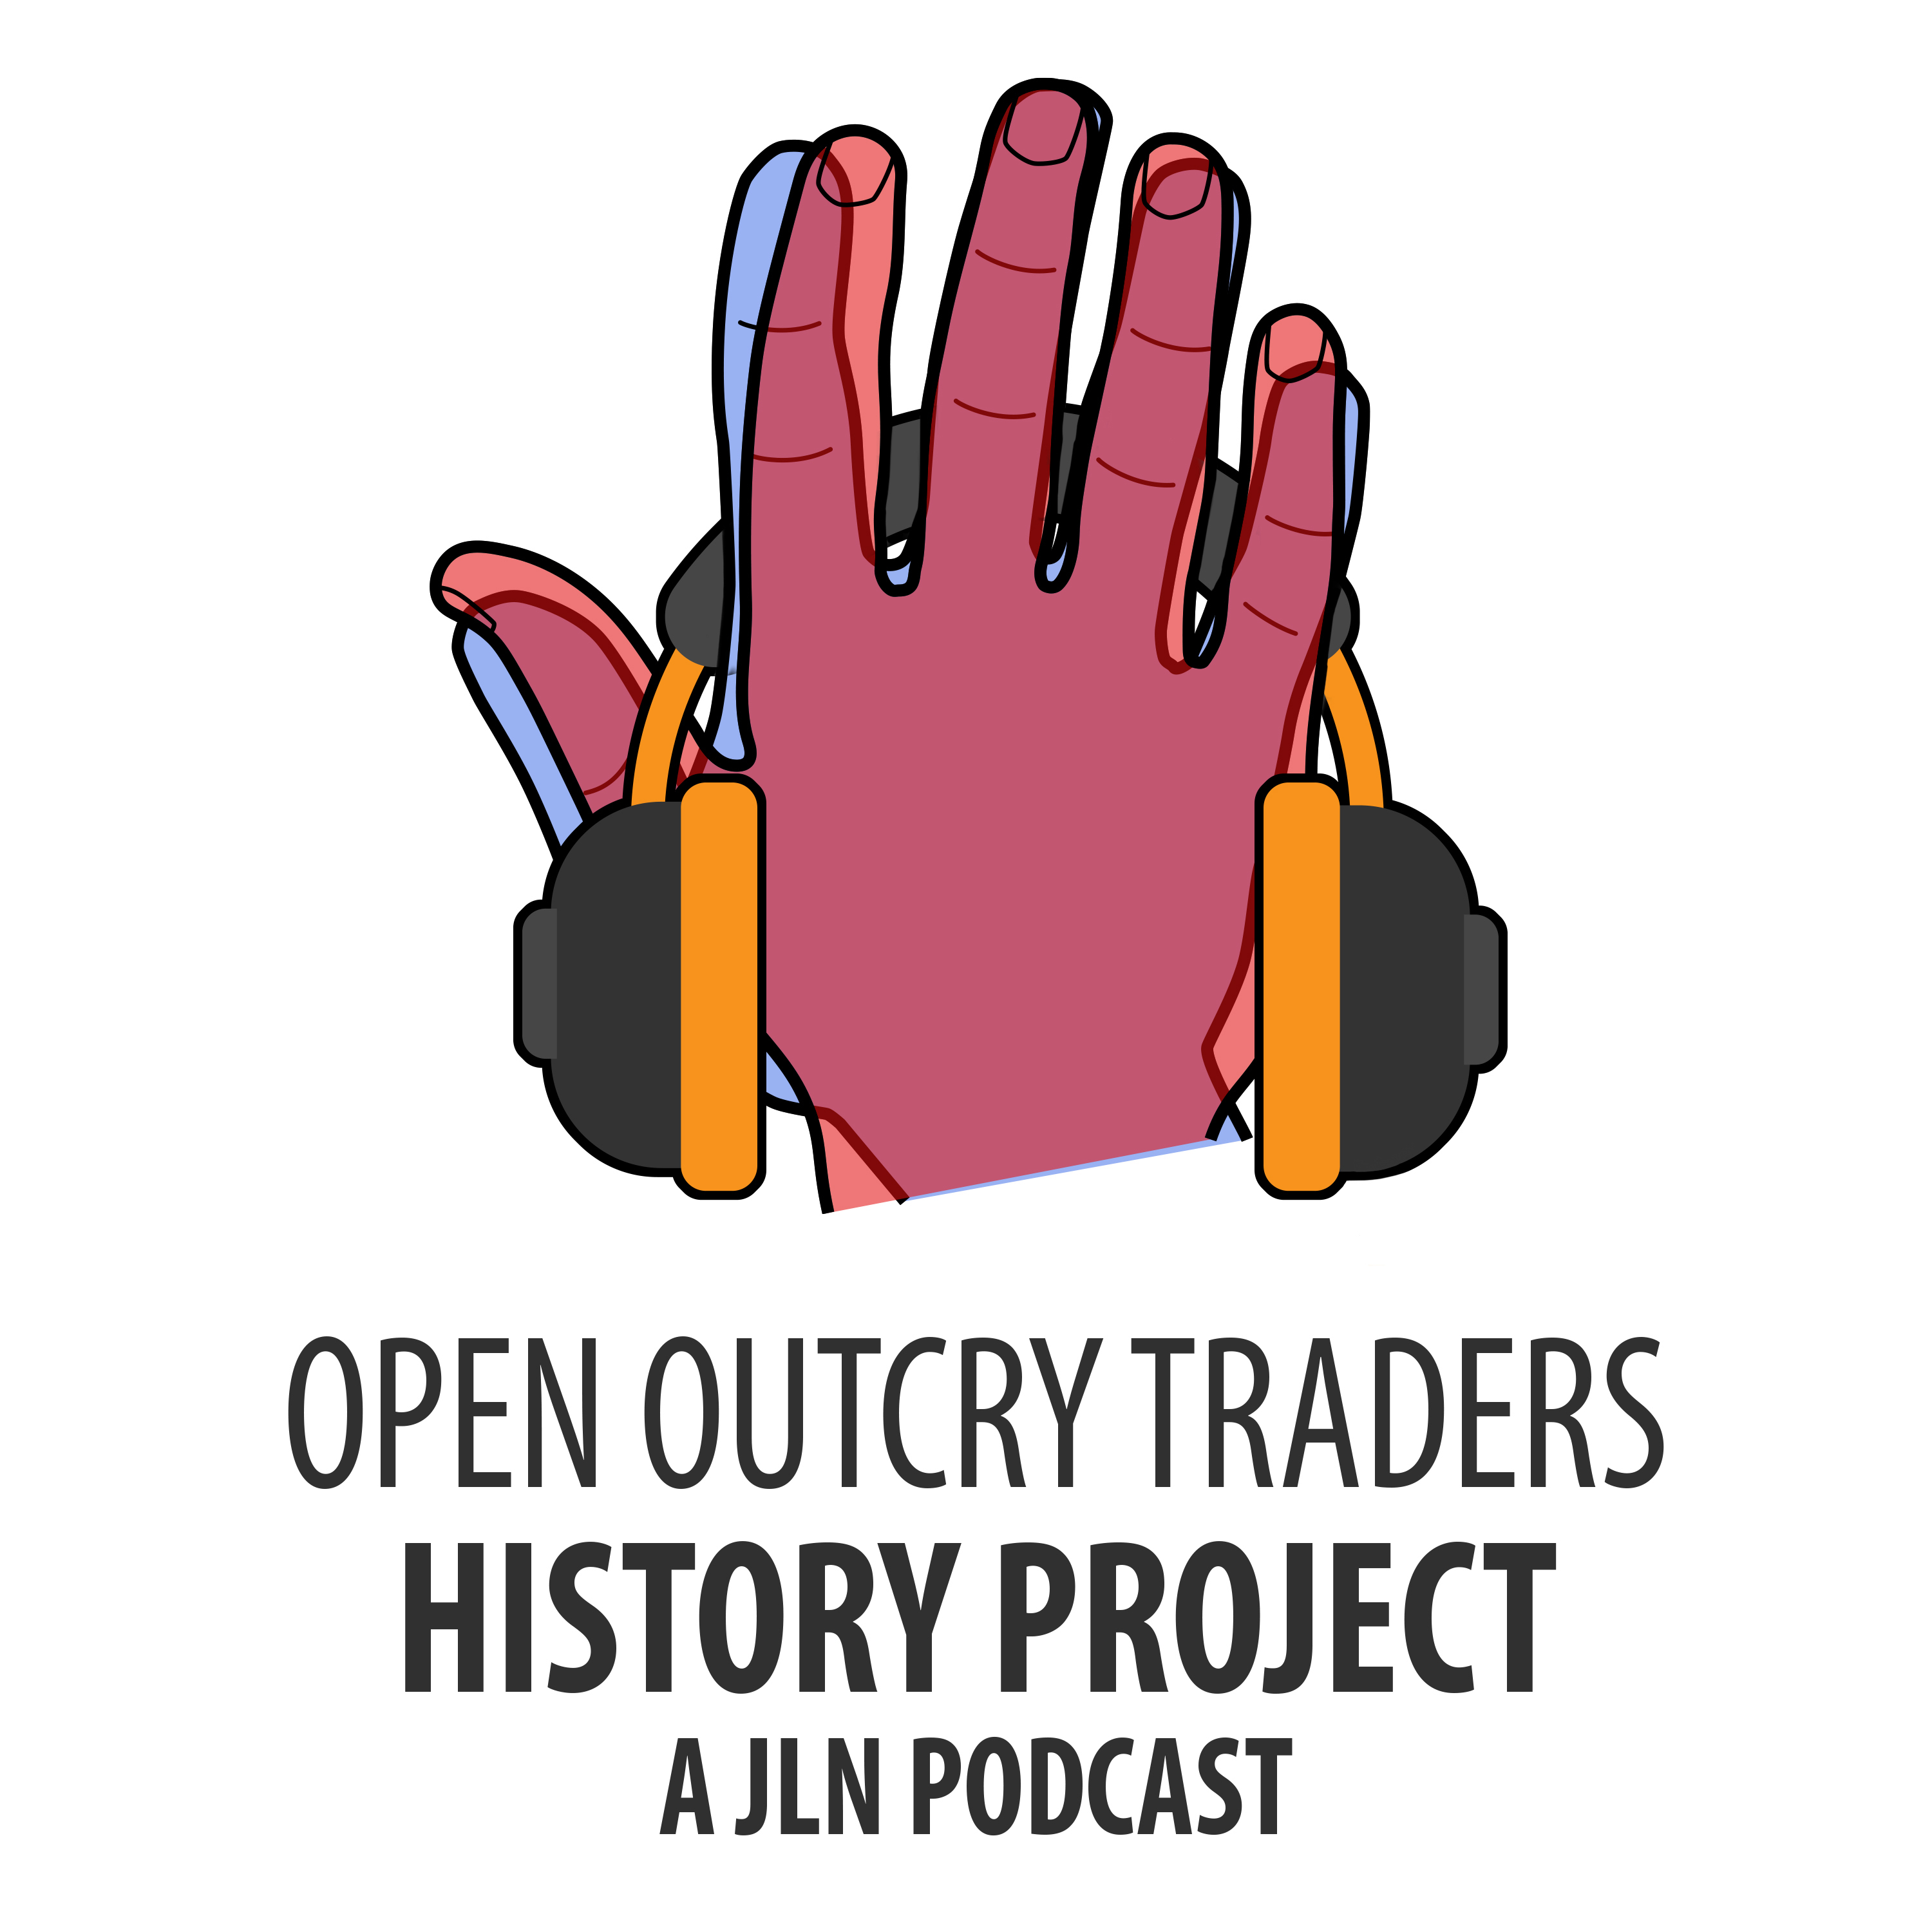 Open Outcry Traders History Project Podcast